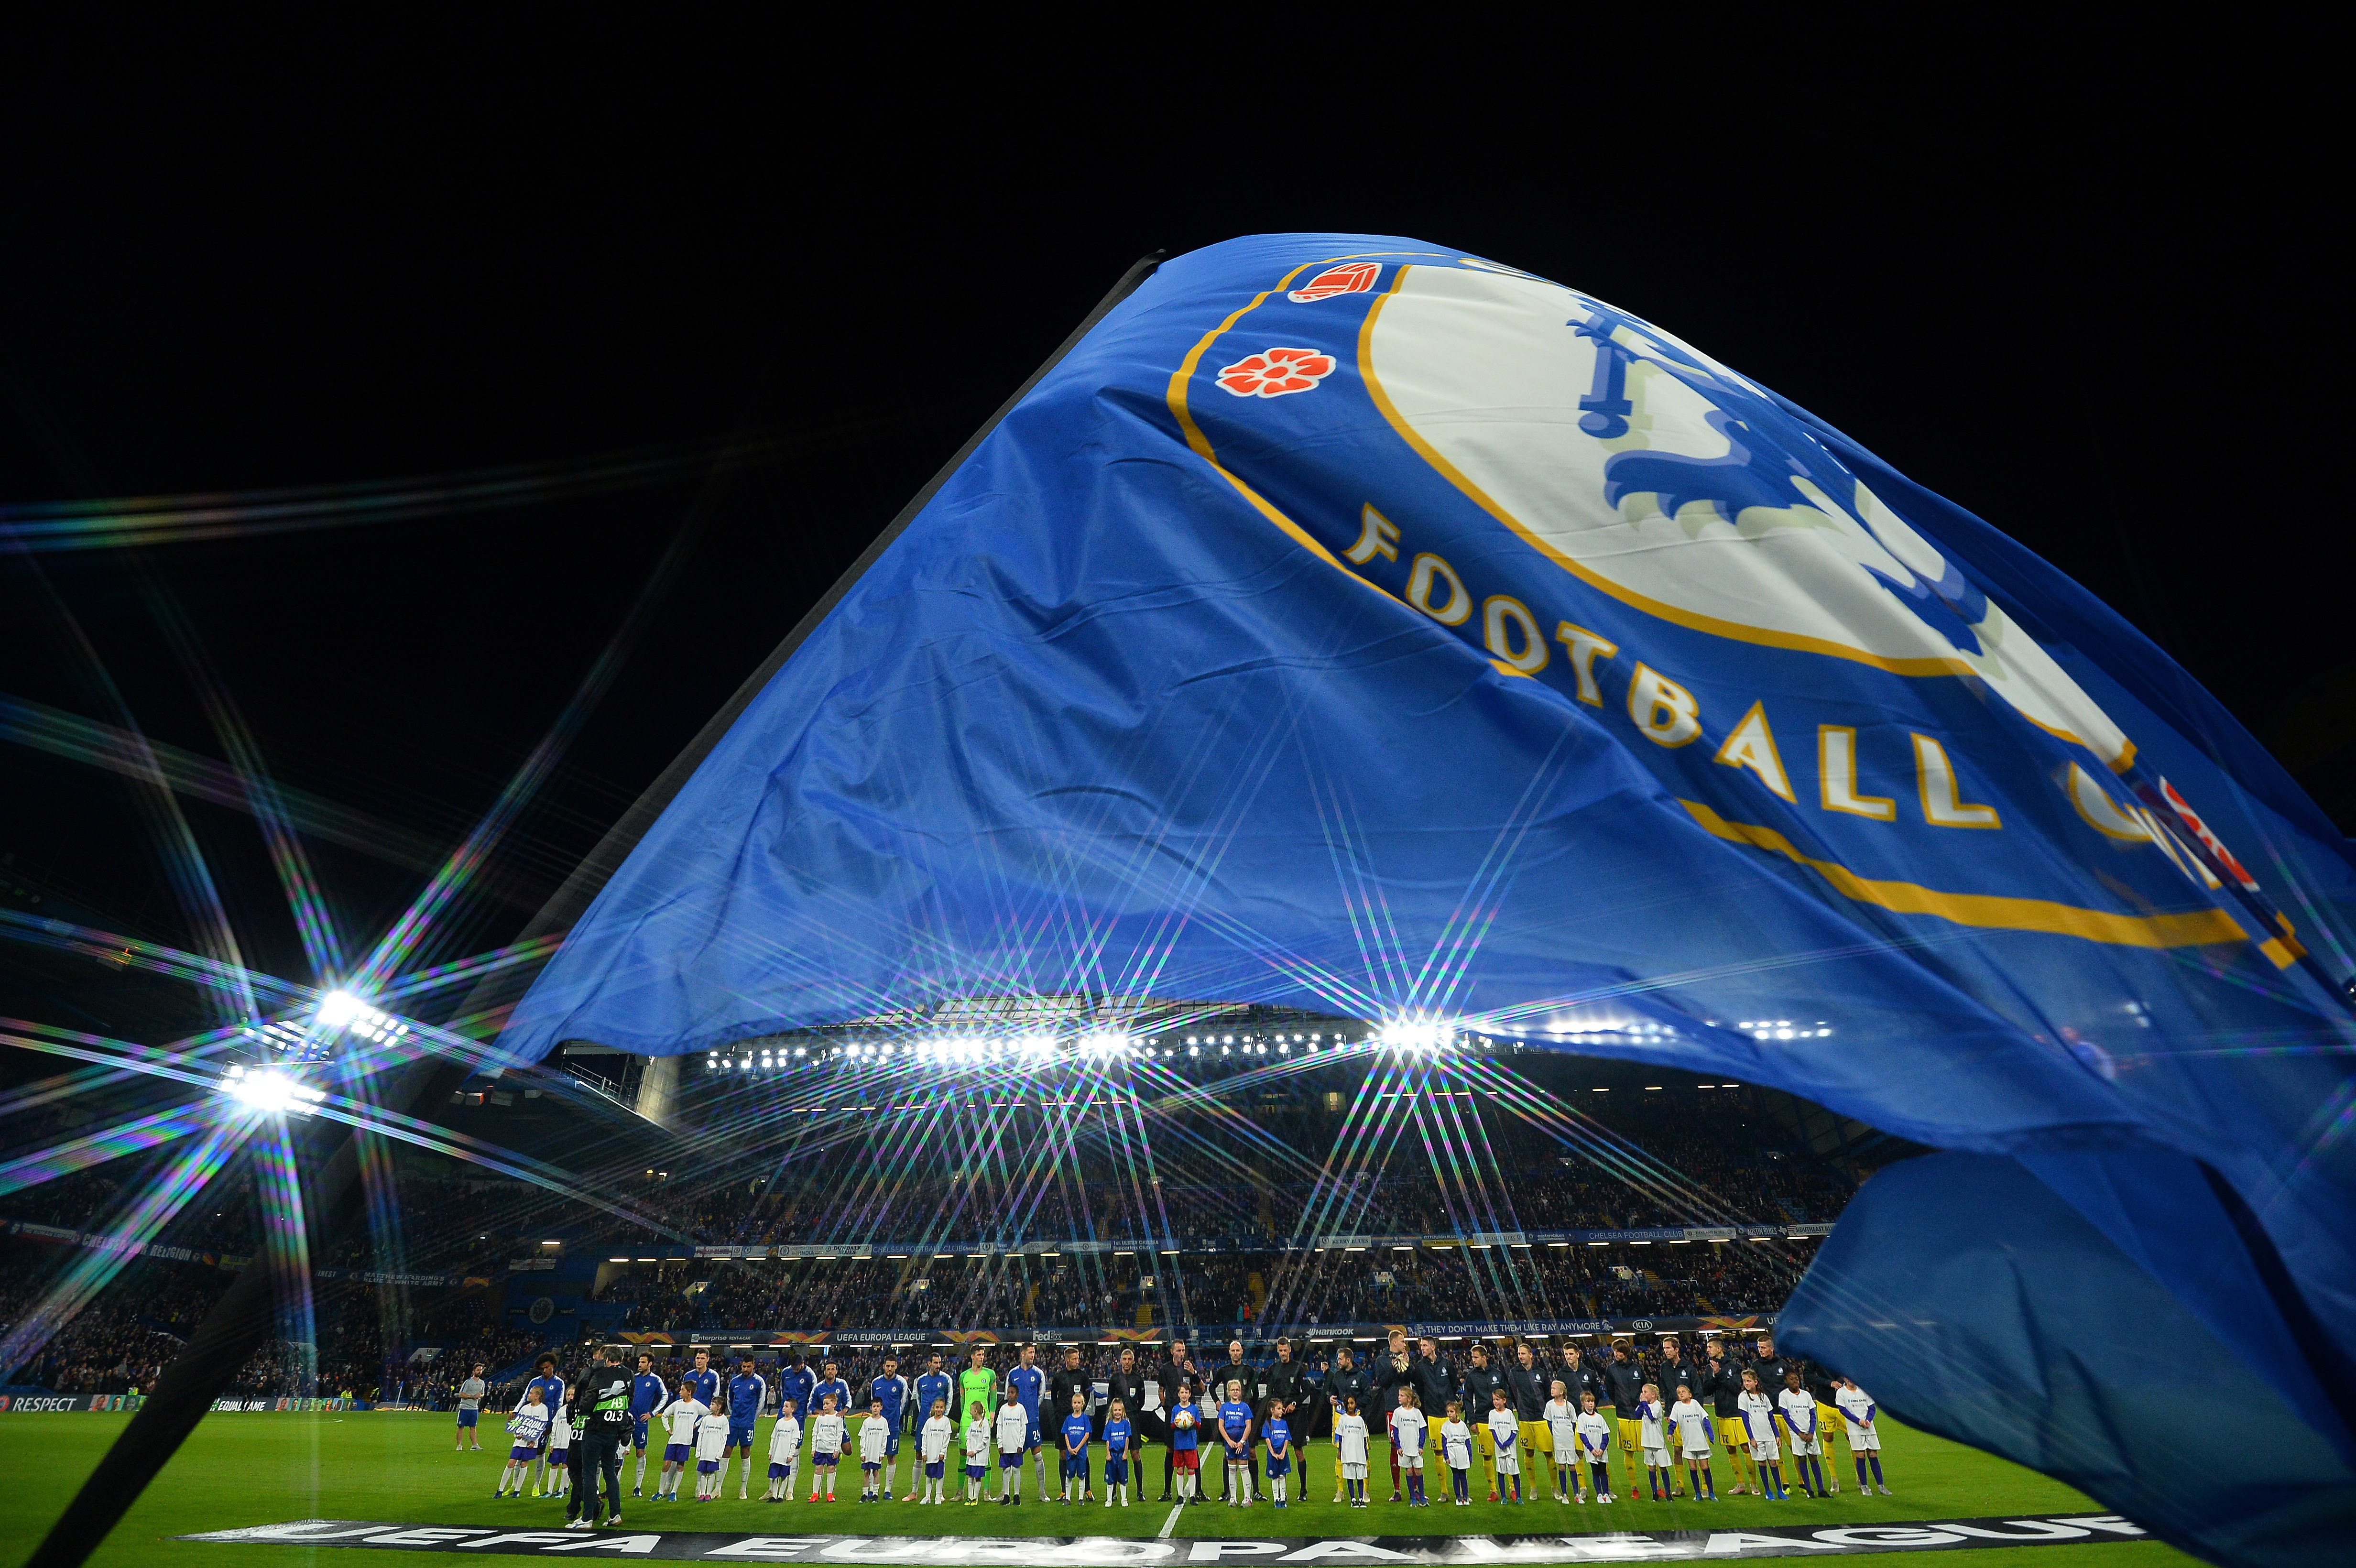 Players line up for a photograph ahead of the UEFA Europa League Group L football match between Chelsea and Bate Borisov at Stamford Bridge in London on October 25, 2018. (Photo by Glyn KIRK / AFP)        (Photo credit should read GLYN KIRK/AFP/Getty Images)